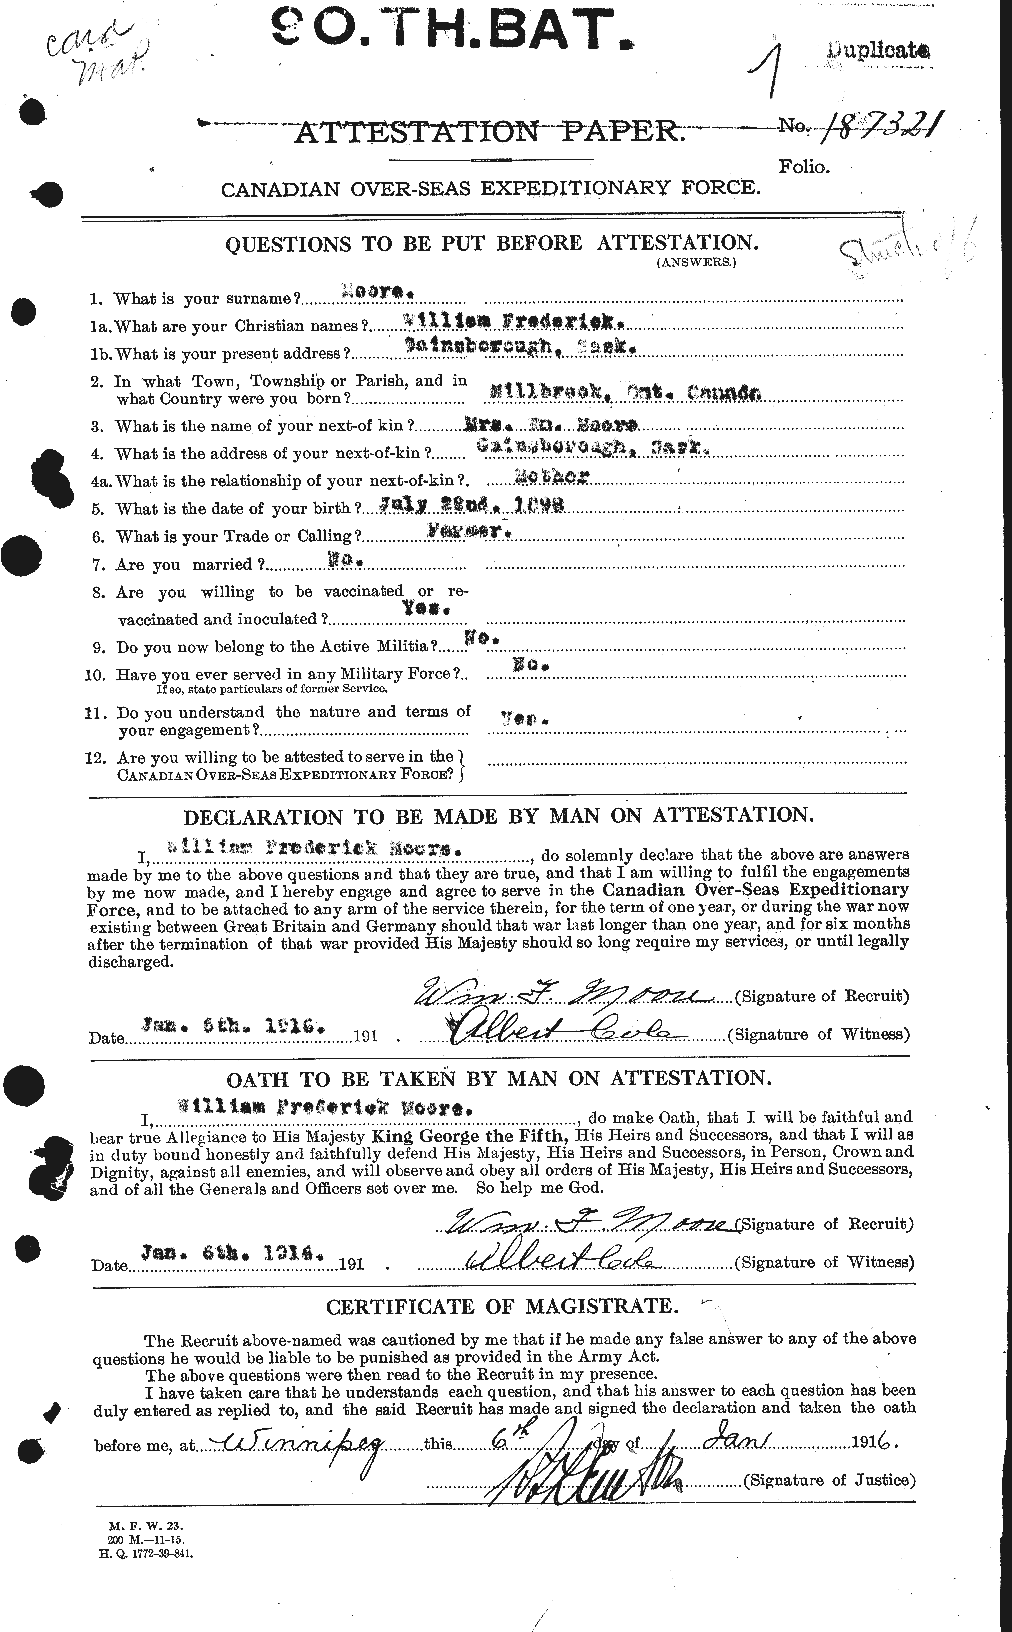 Personnel Records of the First World War - CEF 505807a